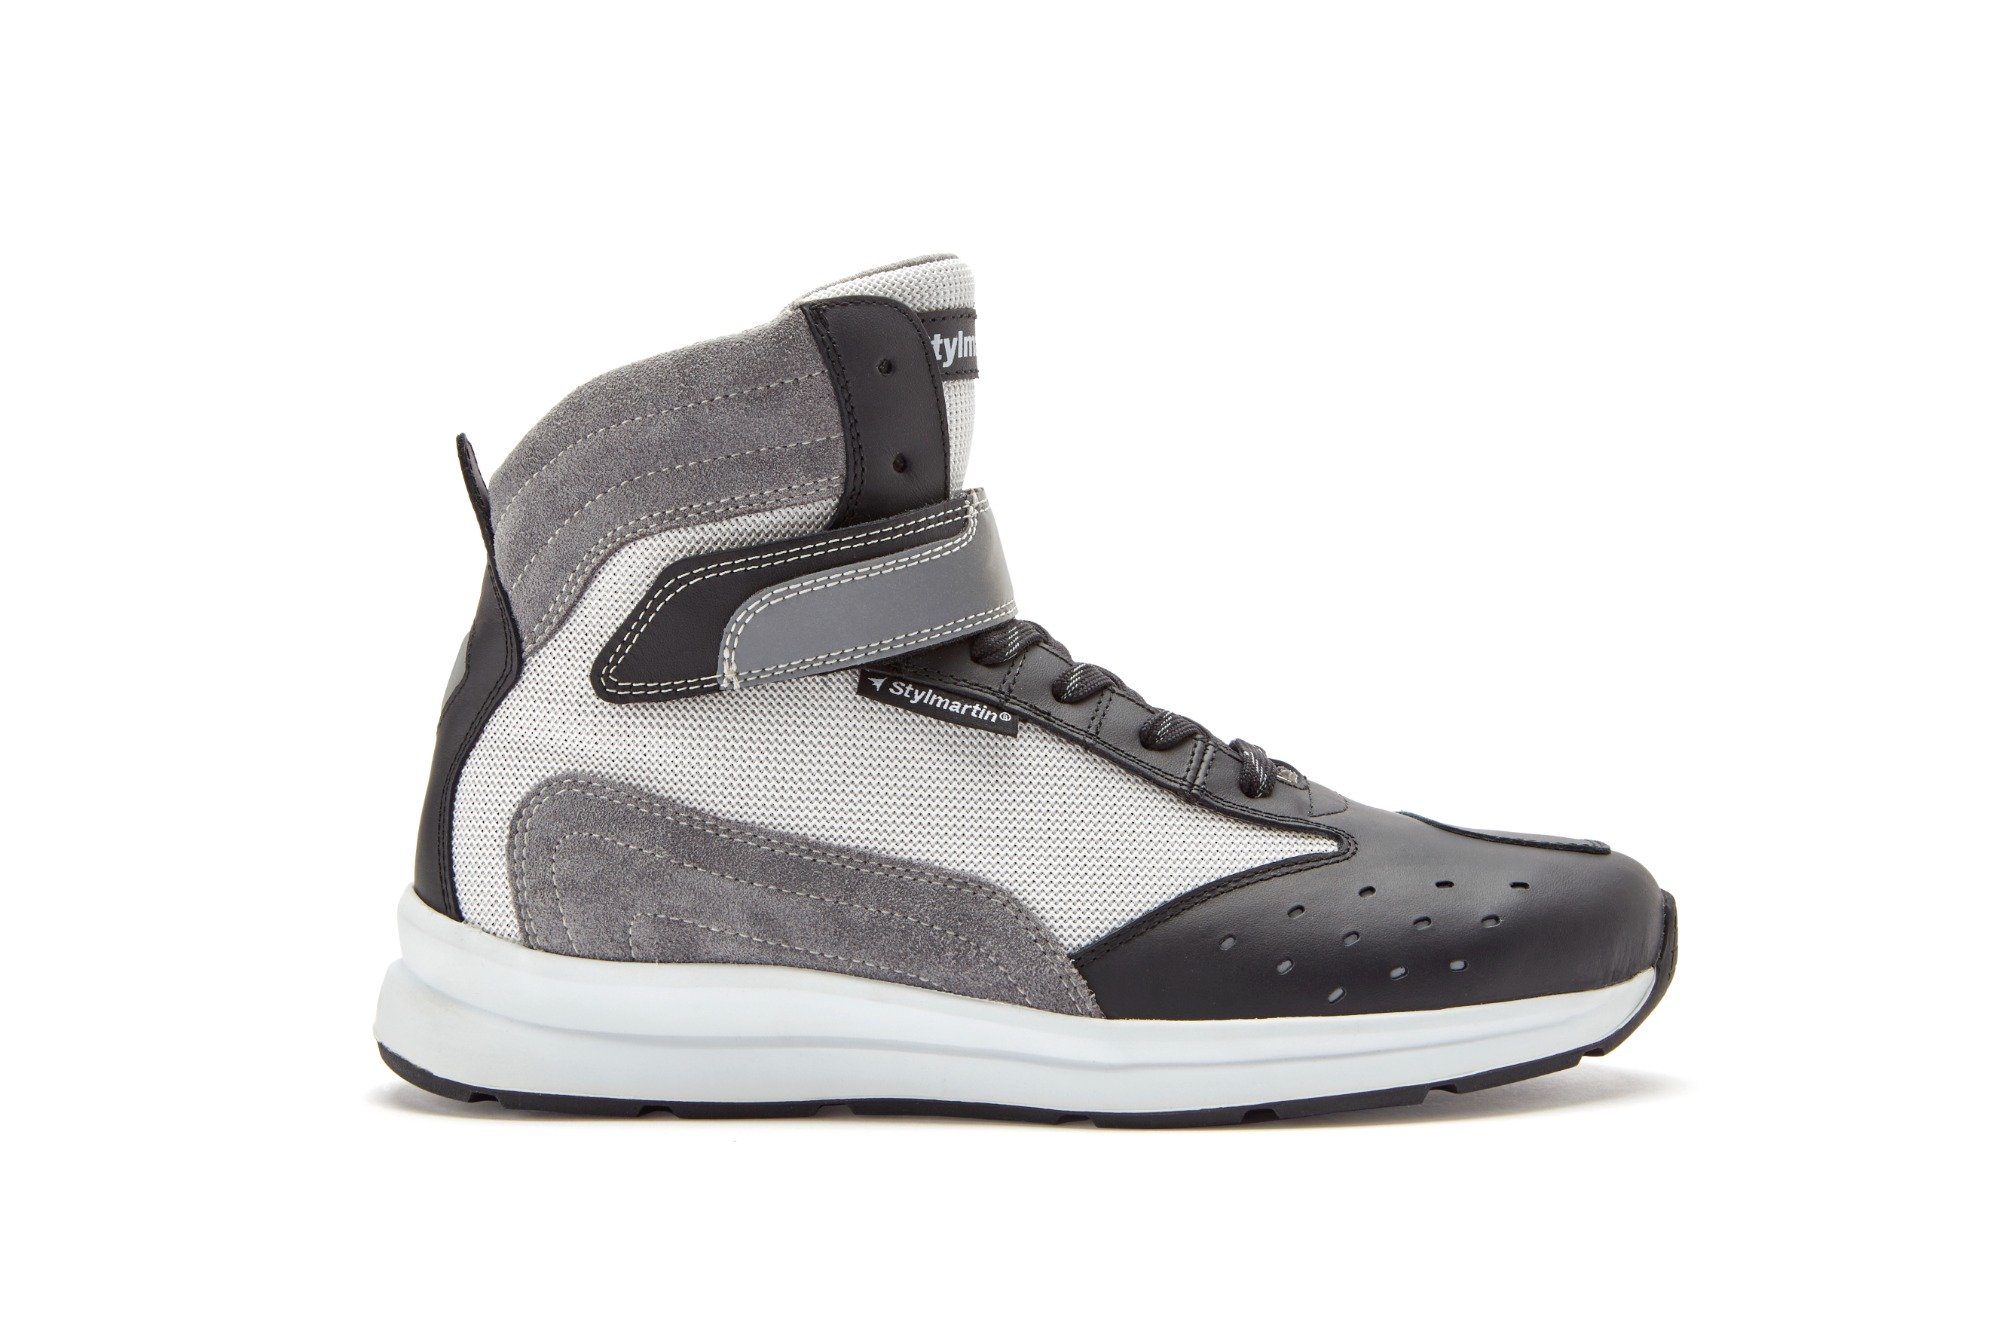 Image of Stylmartin Audax Air Black Anthracite White Size 43 ID 1000001309354